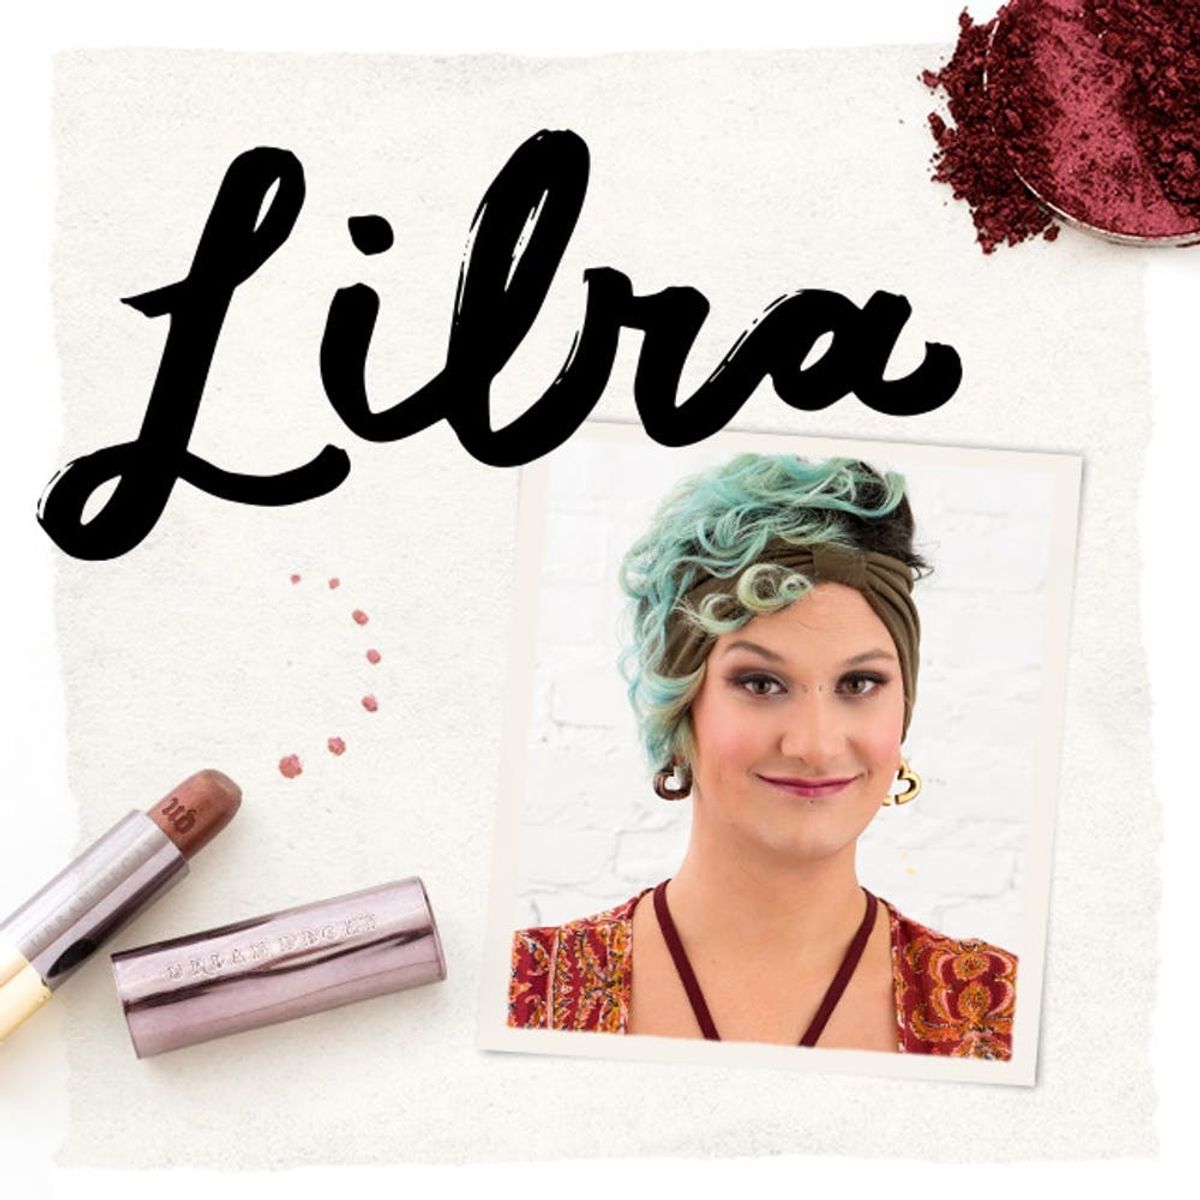 The Best Makeup for Your Zodiac Sign: Libra Edition